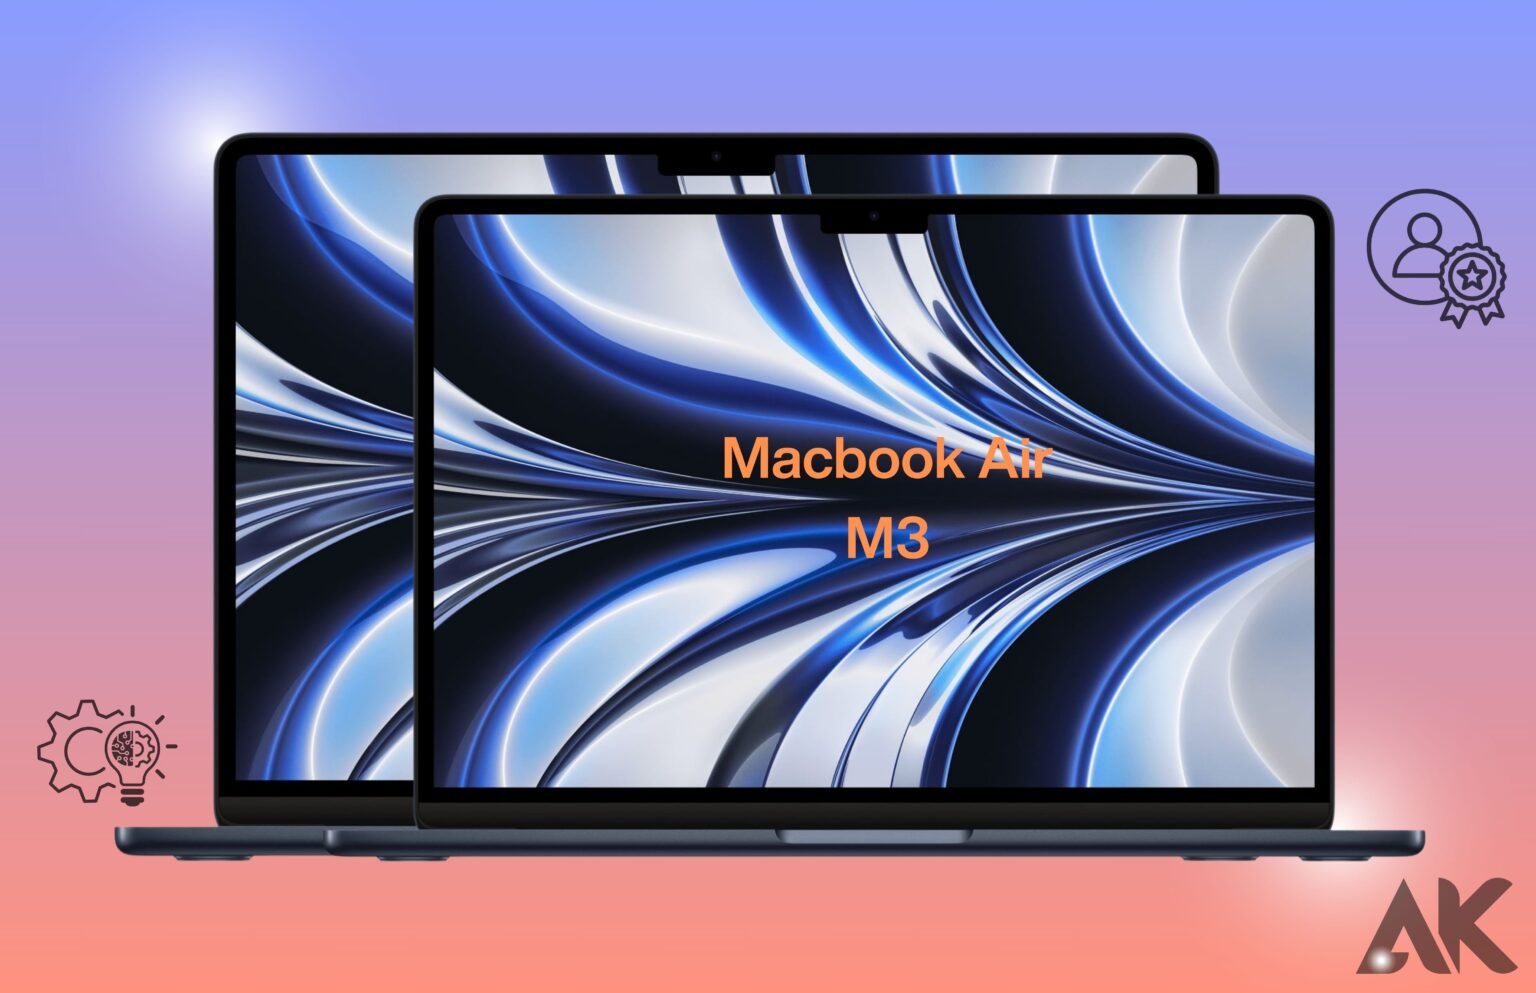 The 15-inch Macbook Air M3: A Boon for Creative Professionals?